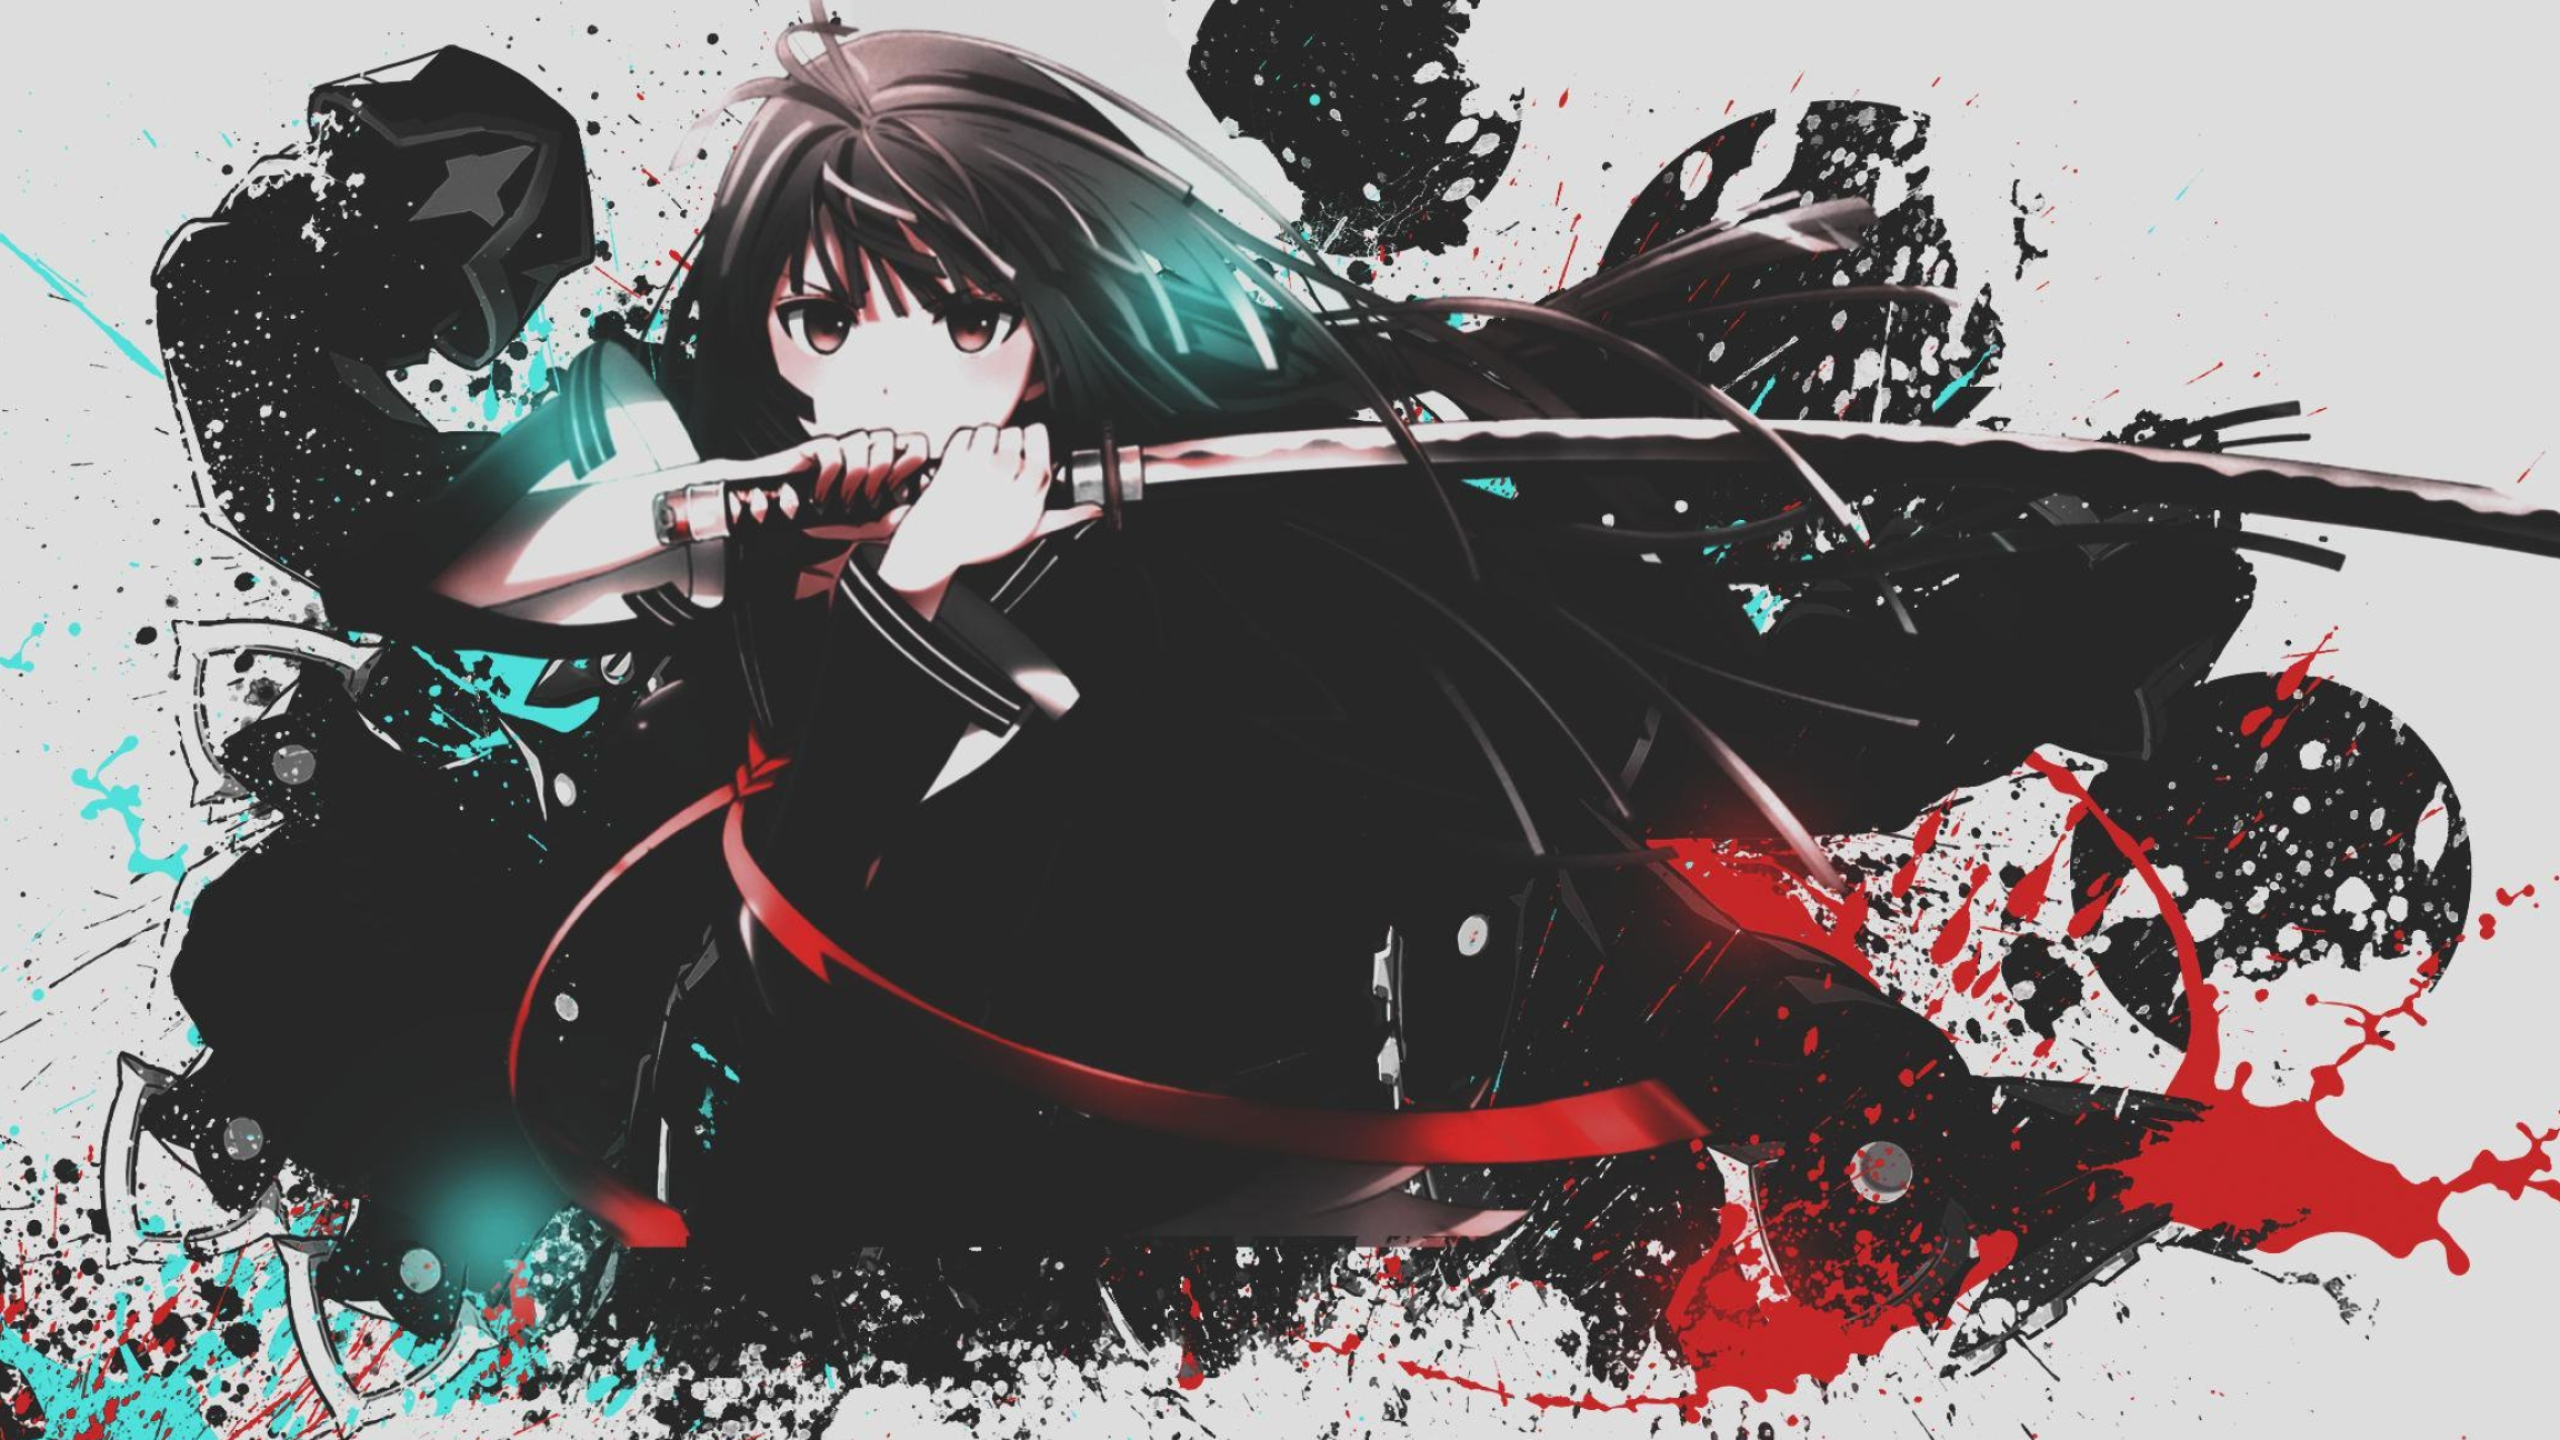 Black Bullet (Anime): Yui Horie, Sadistic, Malicious and very cruel side. 2560x1440 HD Wallpaper.